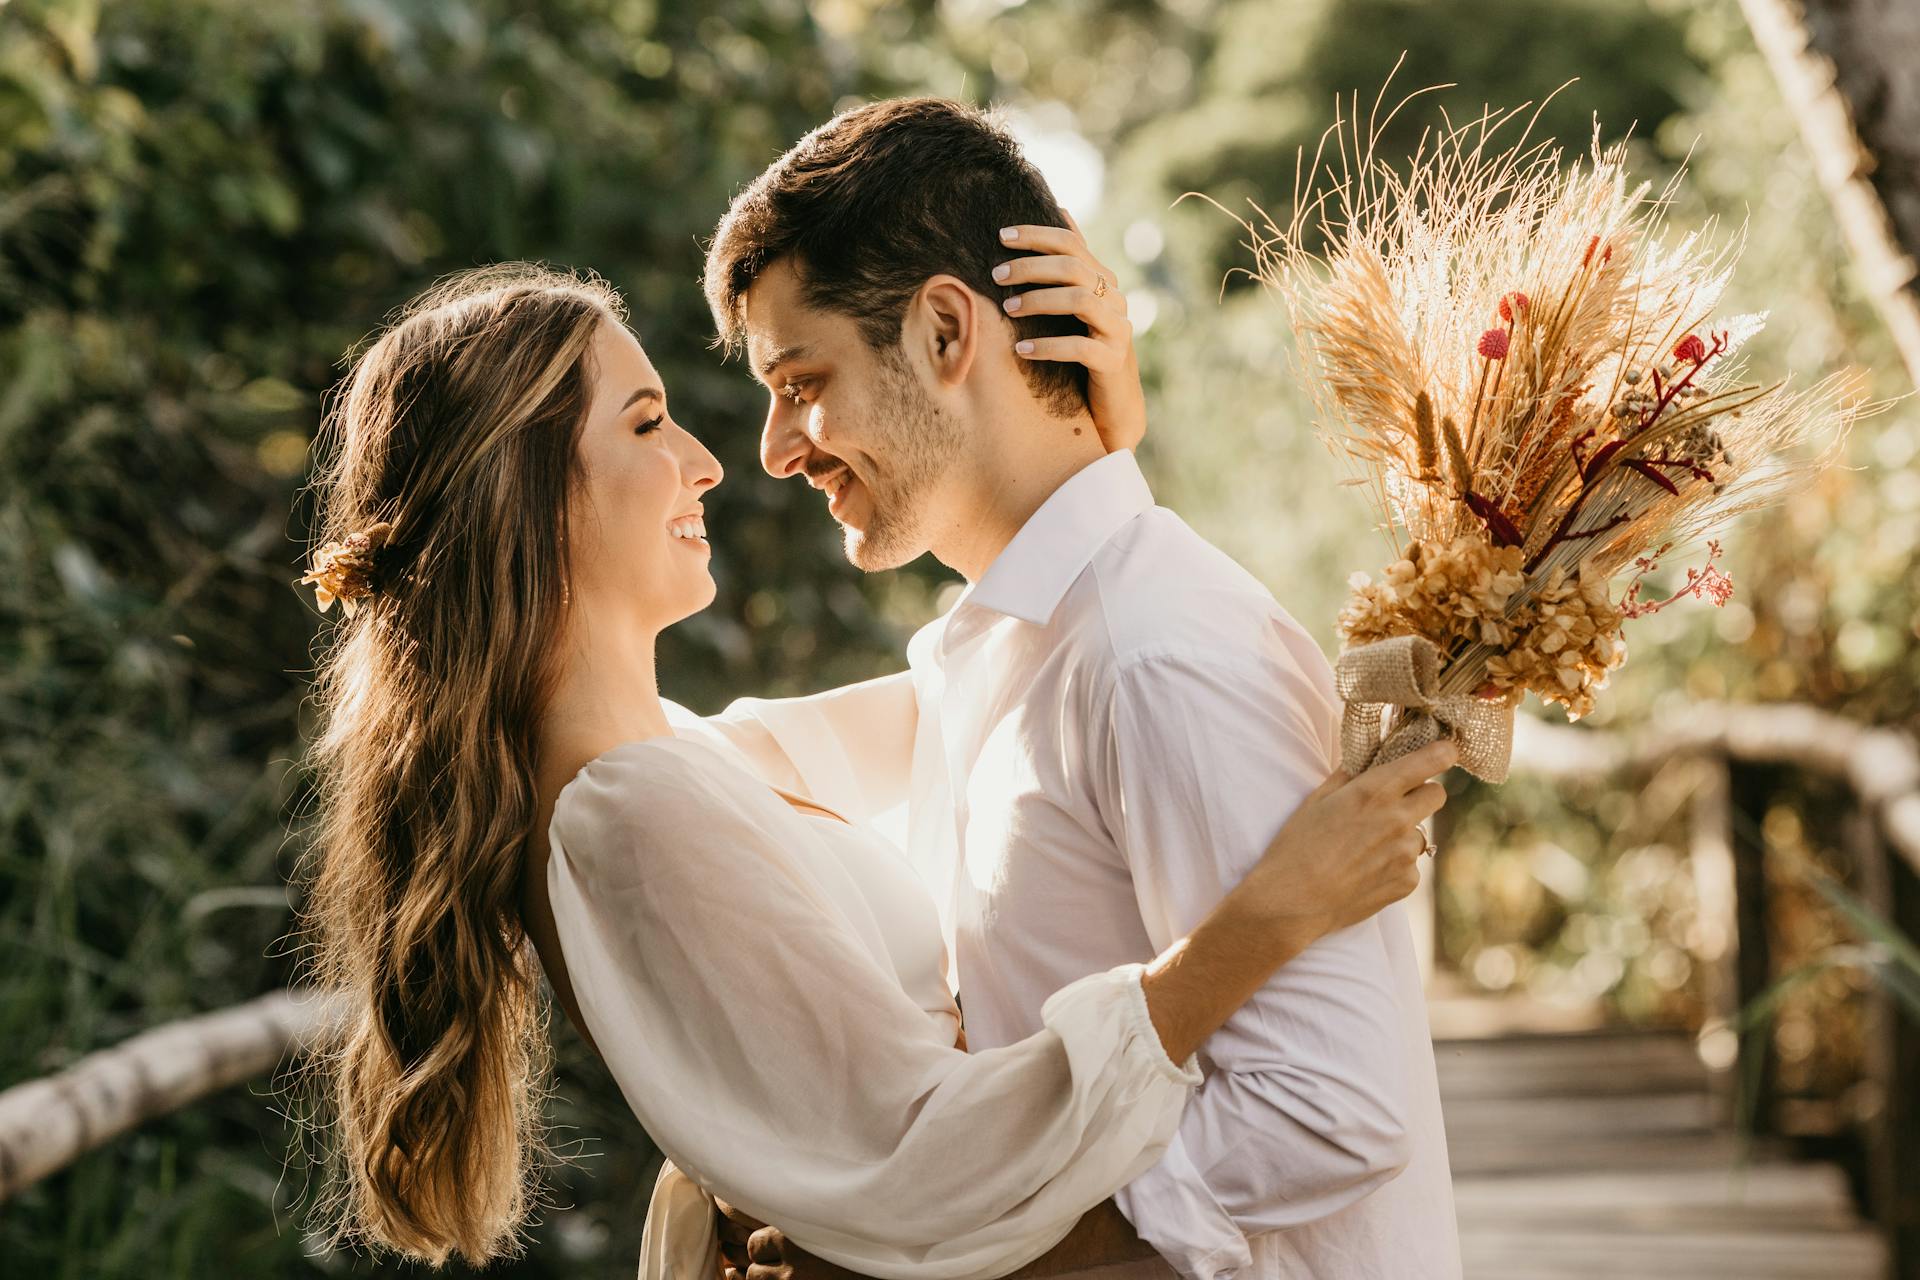 A bride and groom embracing outdoors | Source: Pexels